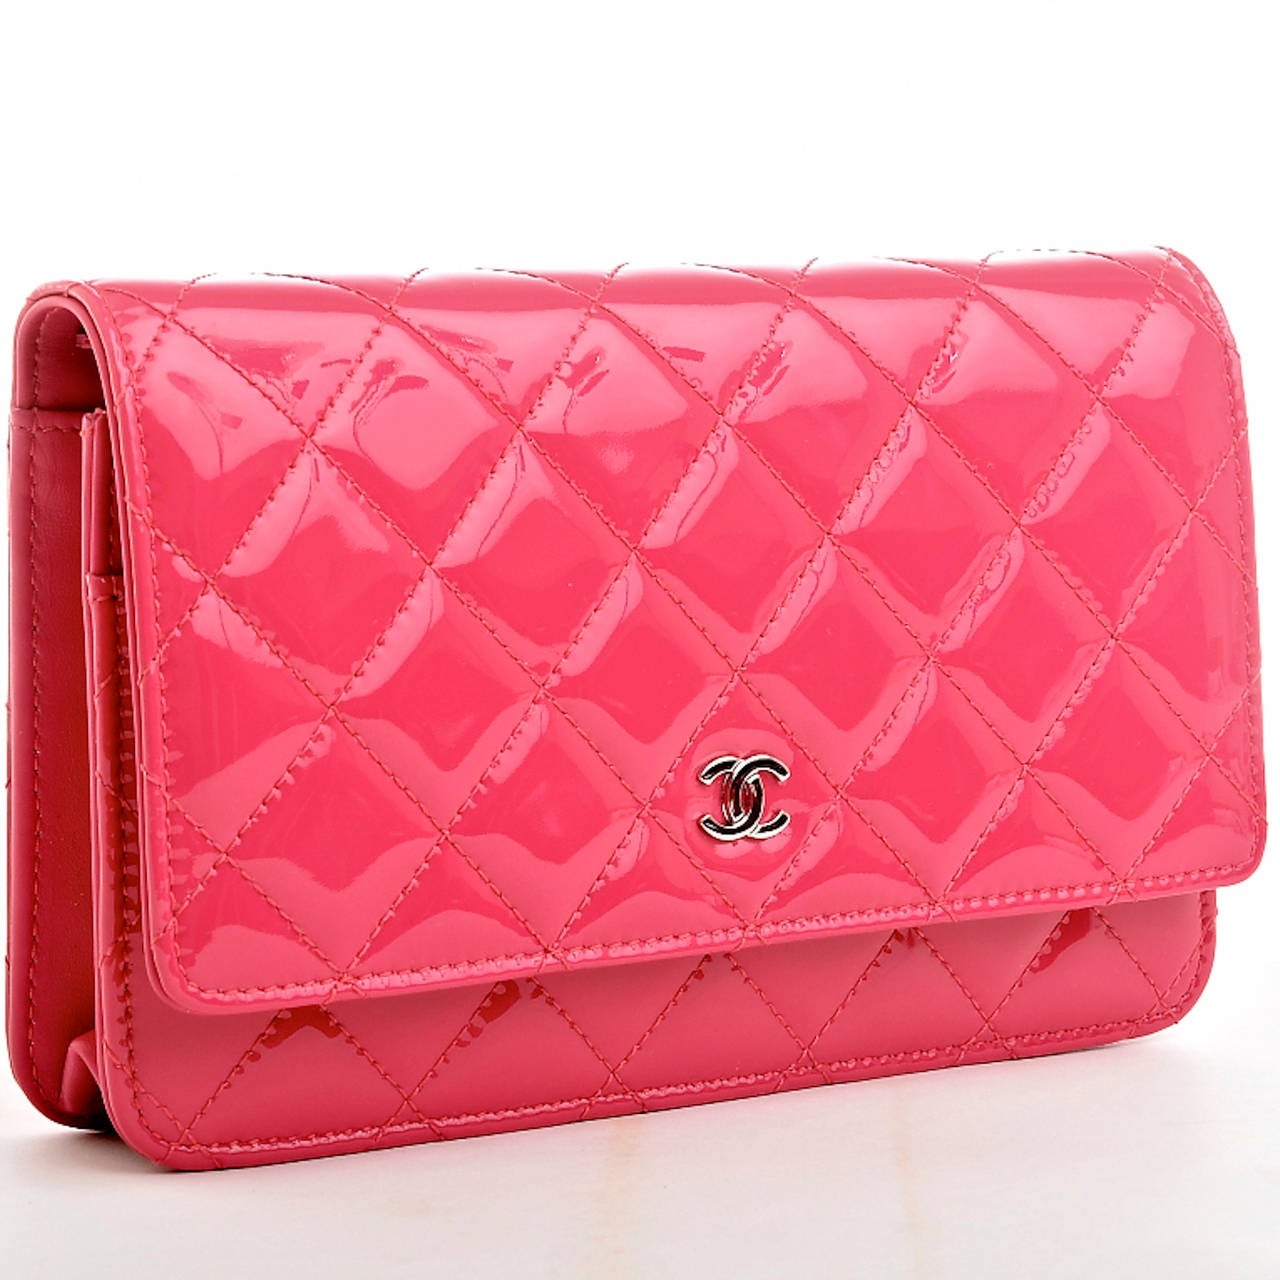 Chanel fuchsia pink Classic Wallet On Chain (WOC) of quilted patent leather and silver tone hardware.

The Wallet On Chain (WOC) is one of the most desired Chanel accessories. Its great styling, versatility and attractive price point makes it a